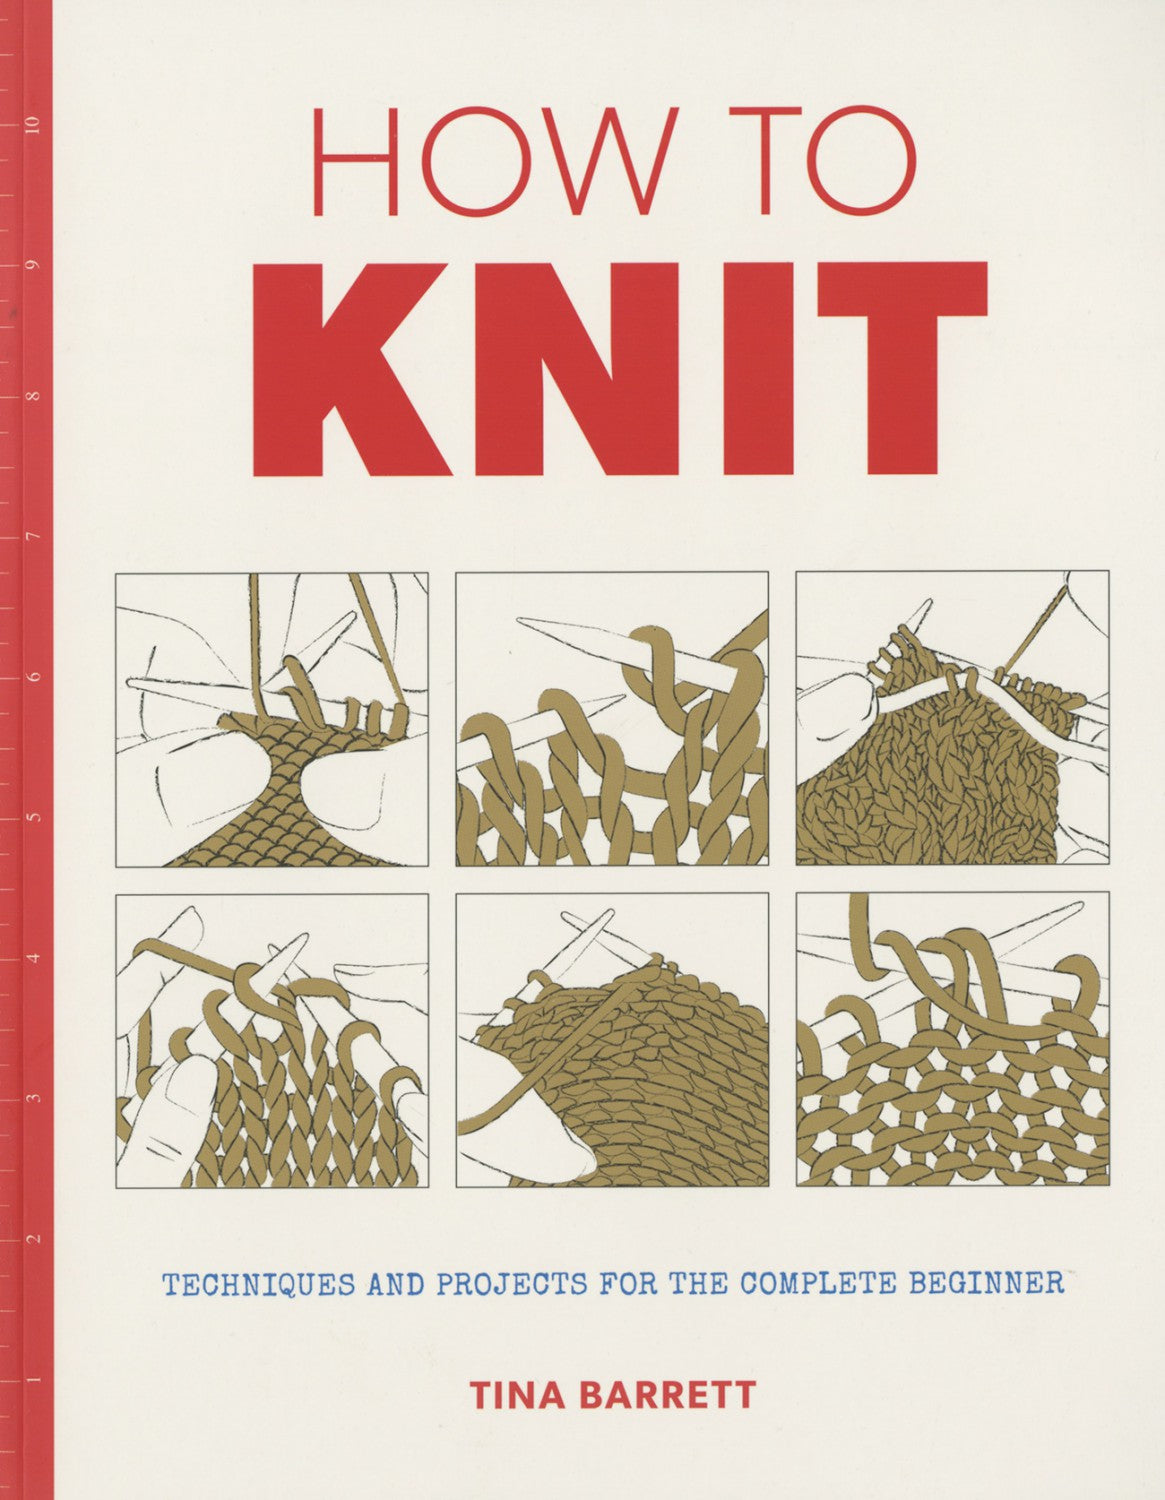 How To Knit (Softcover) (577724219437)